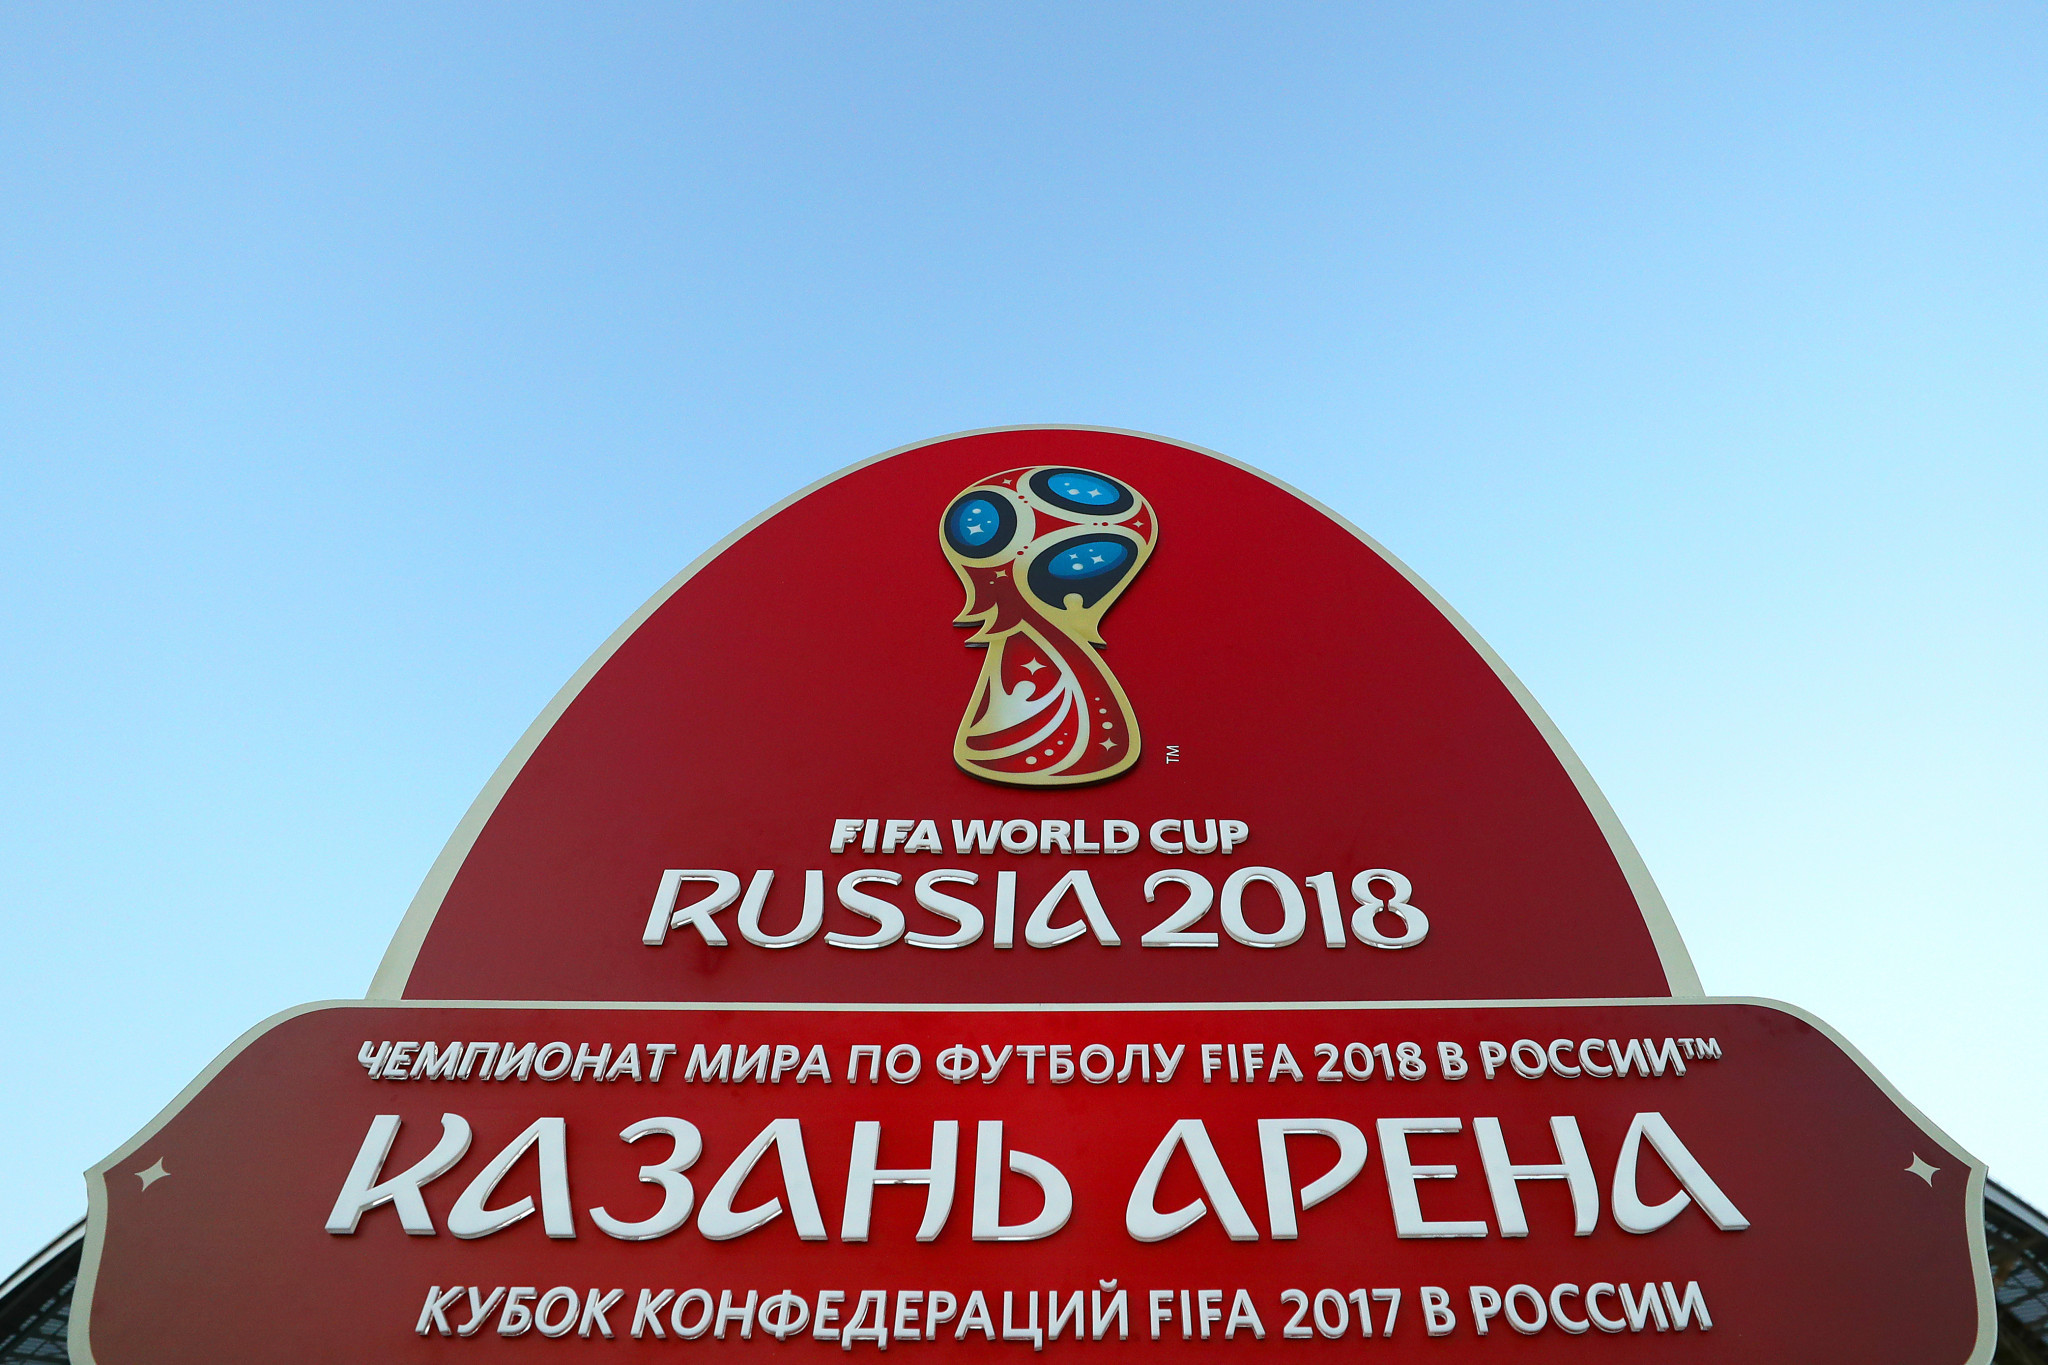 The FIFA Council has approved plans to increase prize money for the nations competing in next year's FIFA World Cup 2018 in Russia ©Getty Images